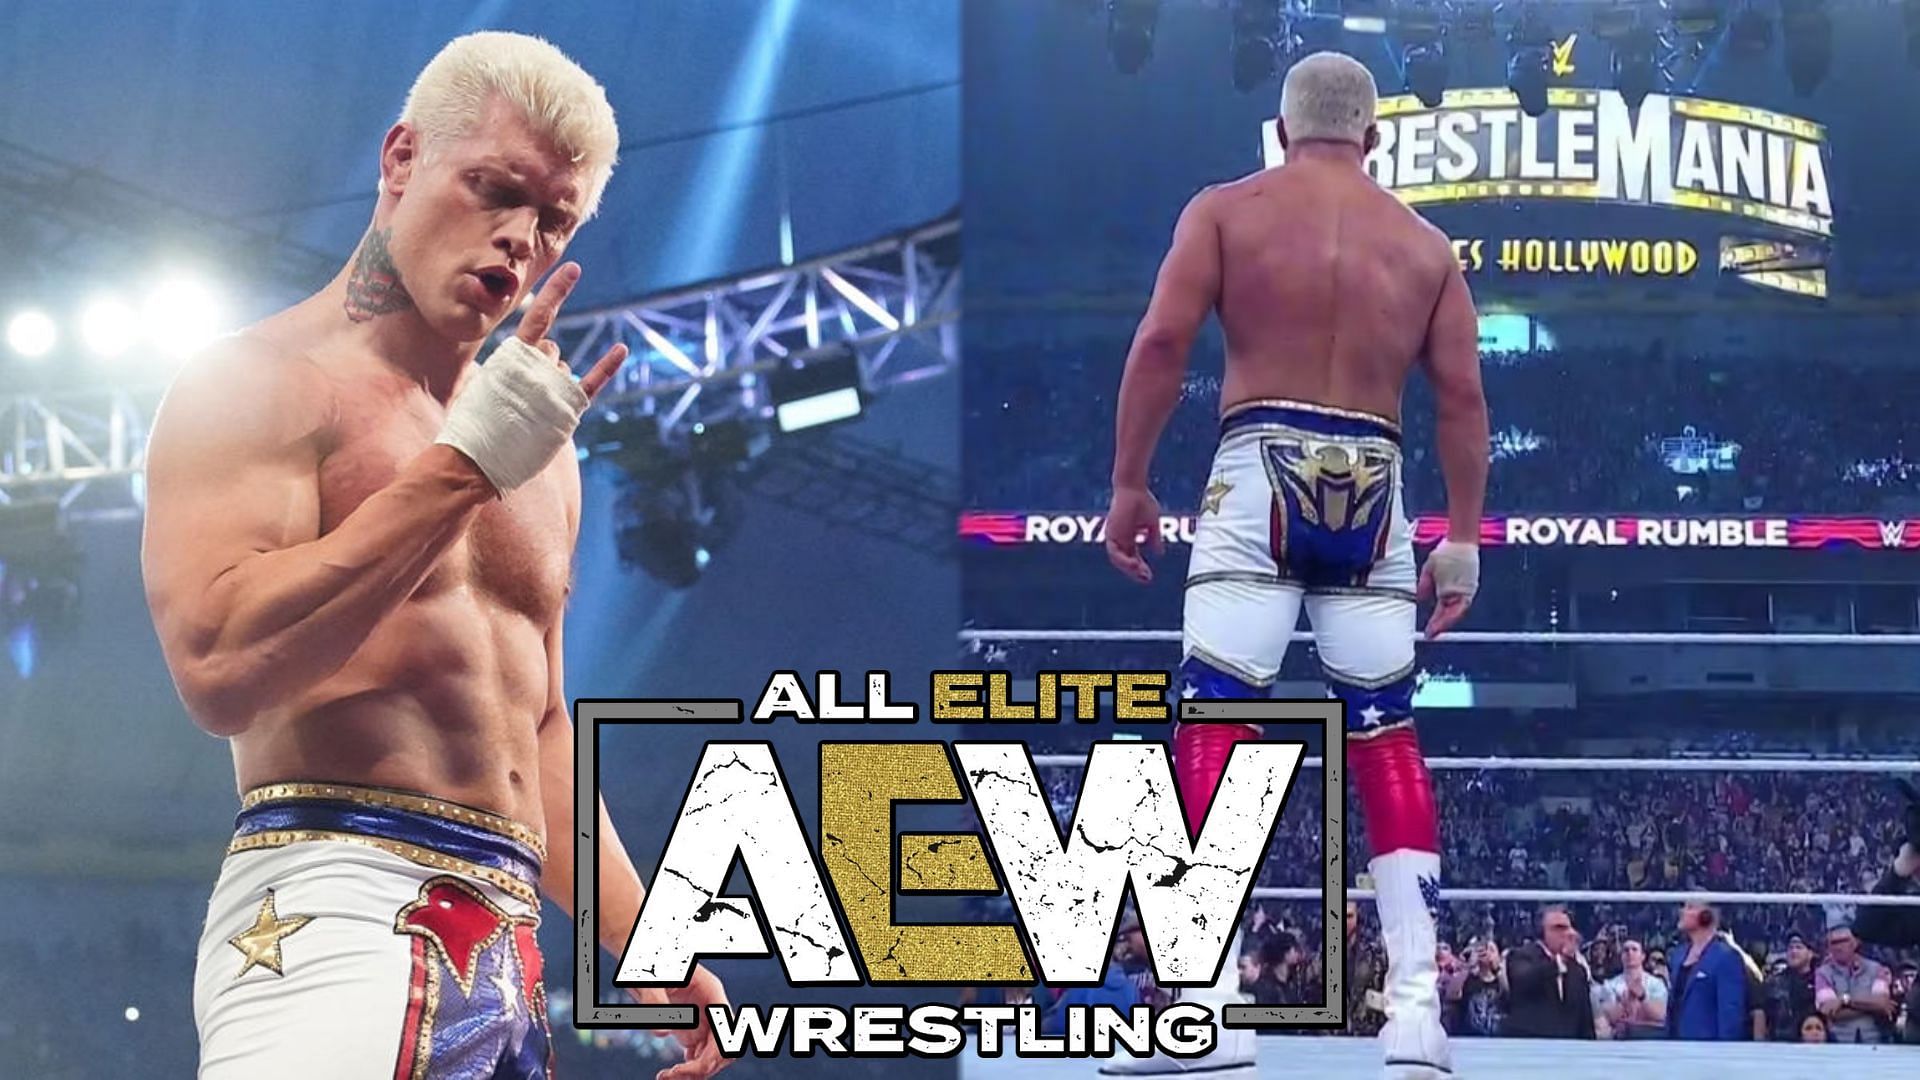 Cody Rhodes will go on to main event WrestleMania this year.